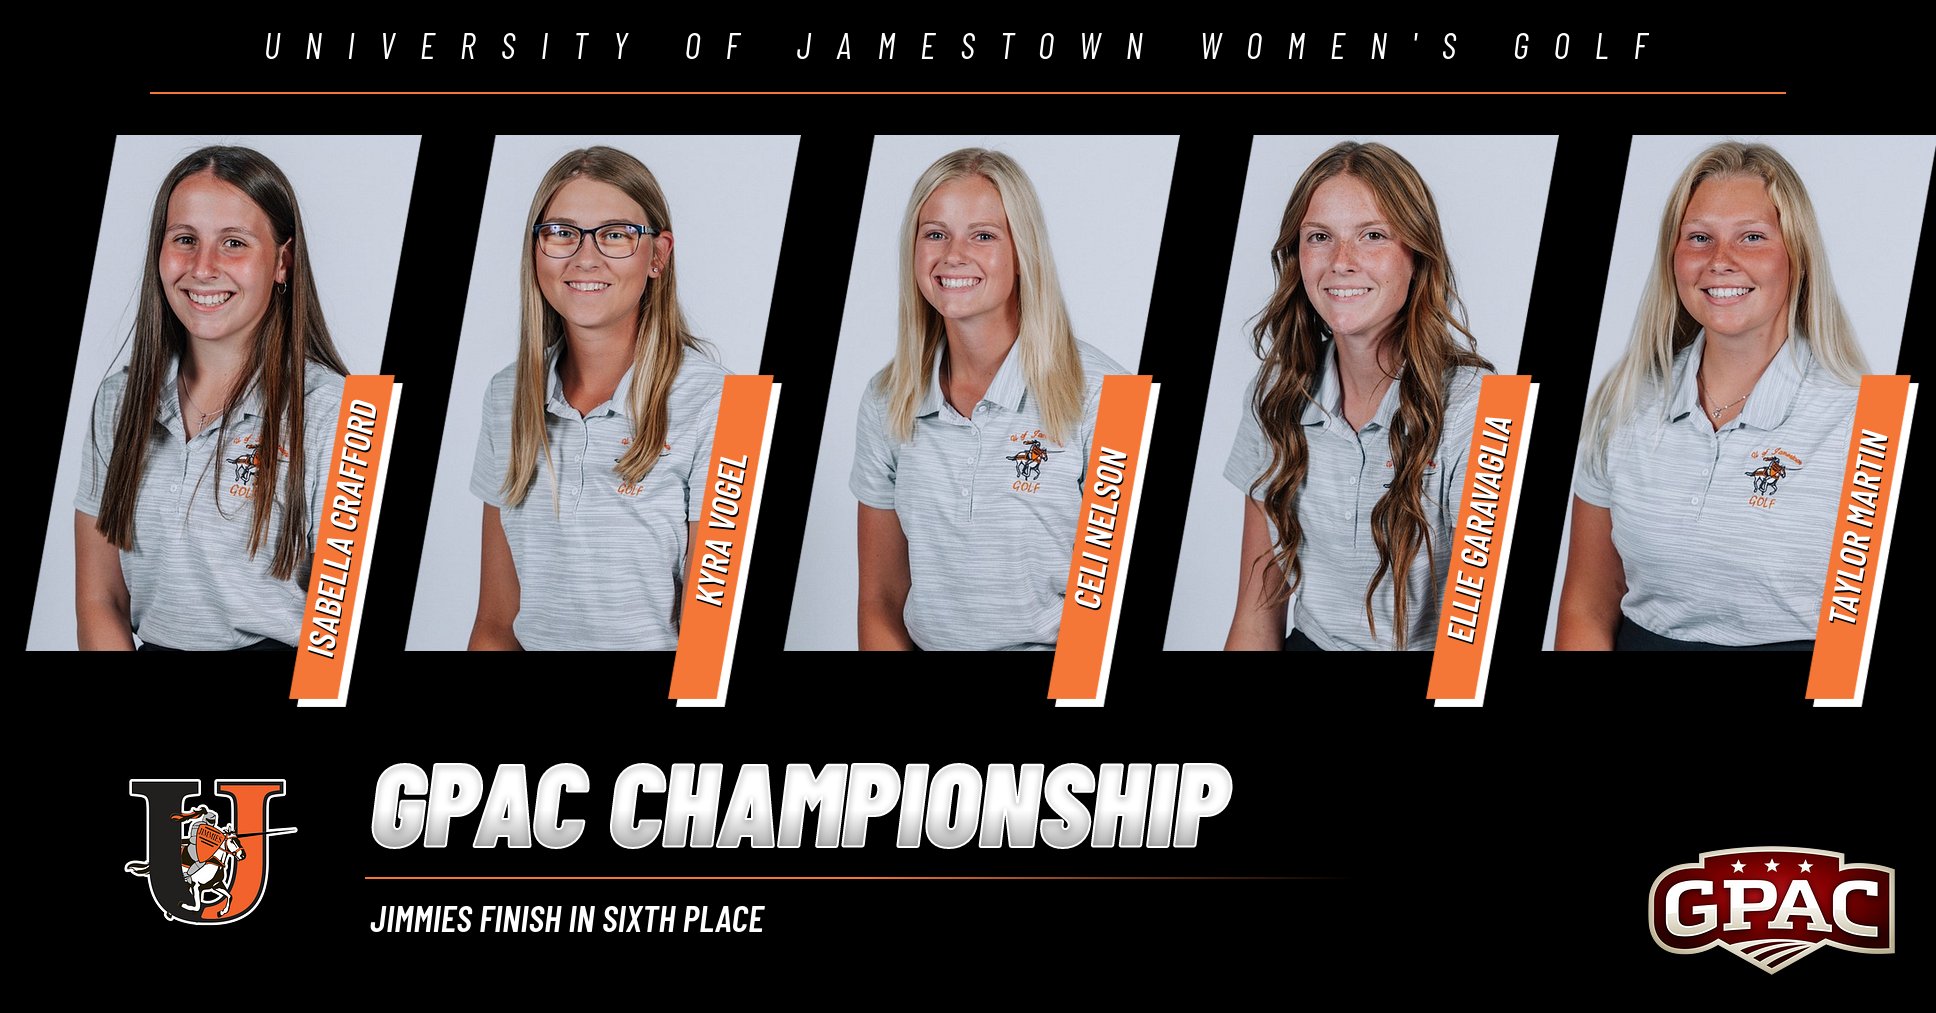 Five women represent Jimmie golf at the GPAC Championship